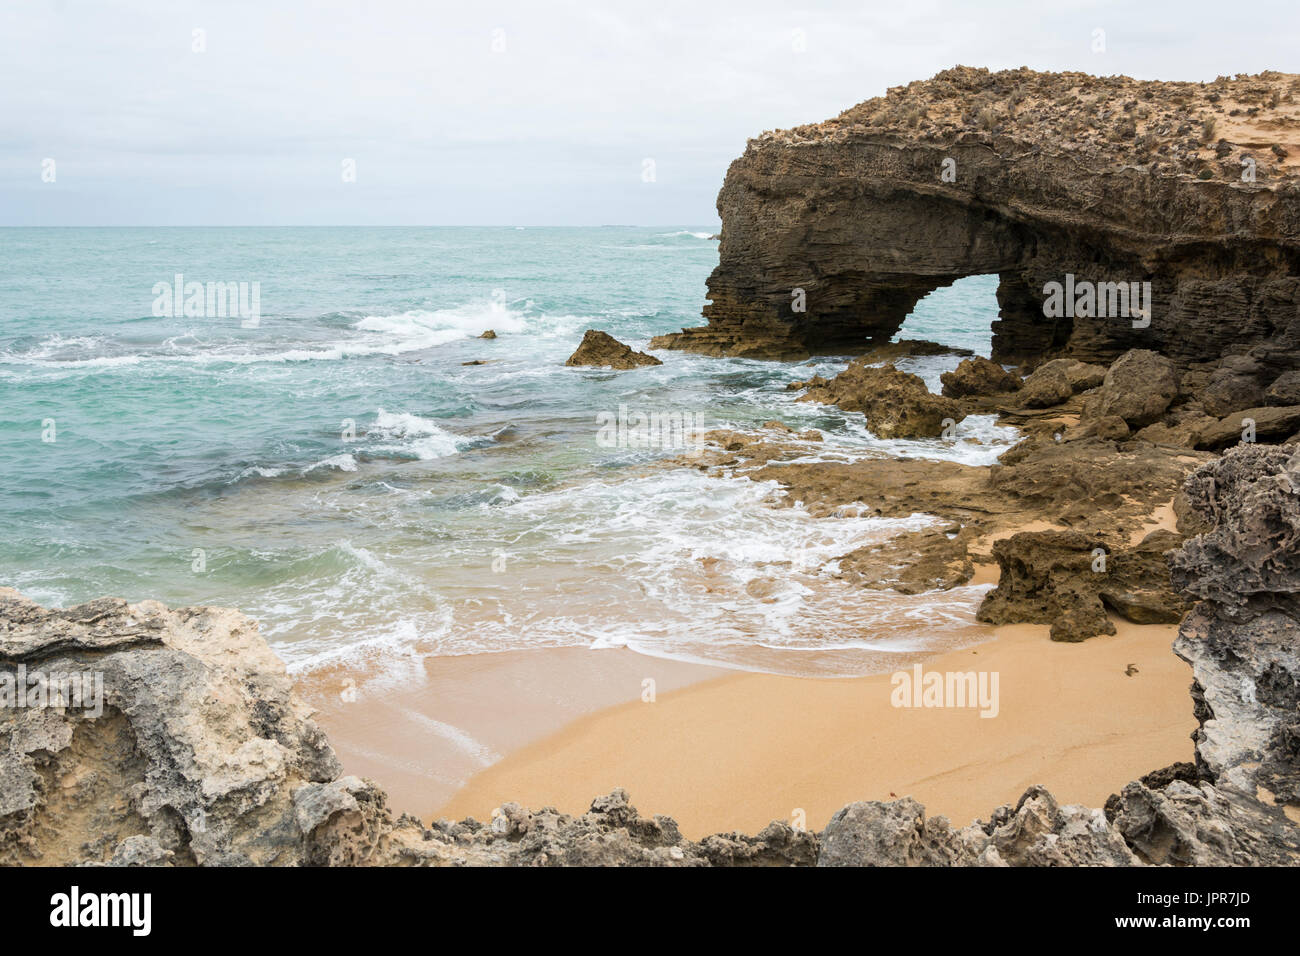 Arched rock formation on a coastal beach, near the light house at Robe, situated within the South East coastal region of South Australia, Stock Photo